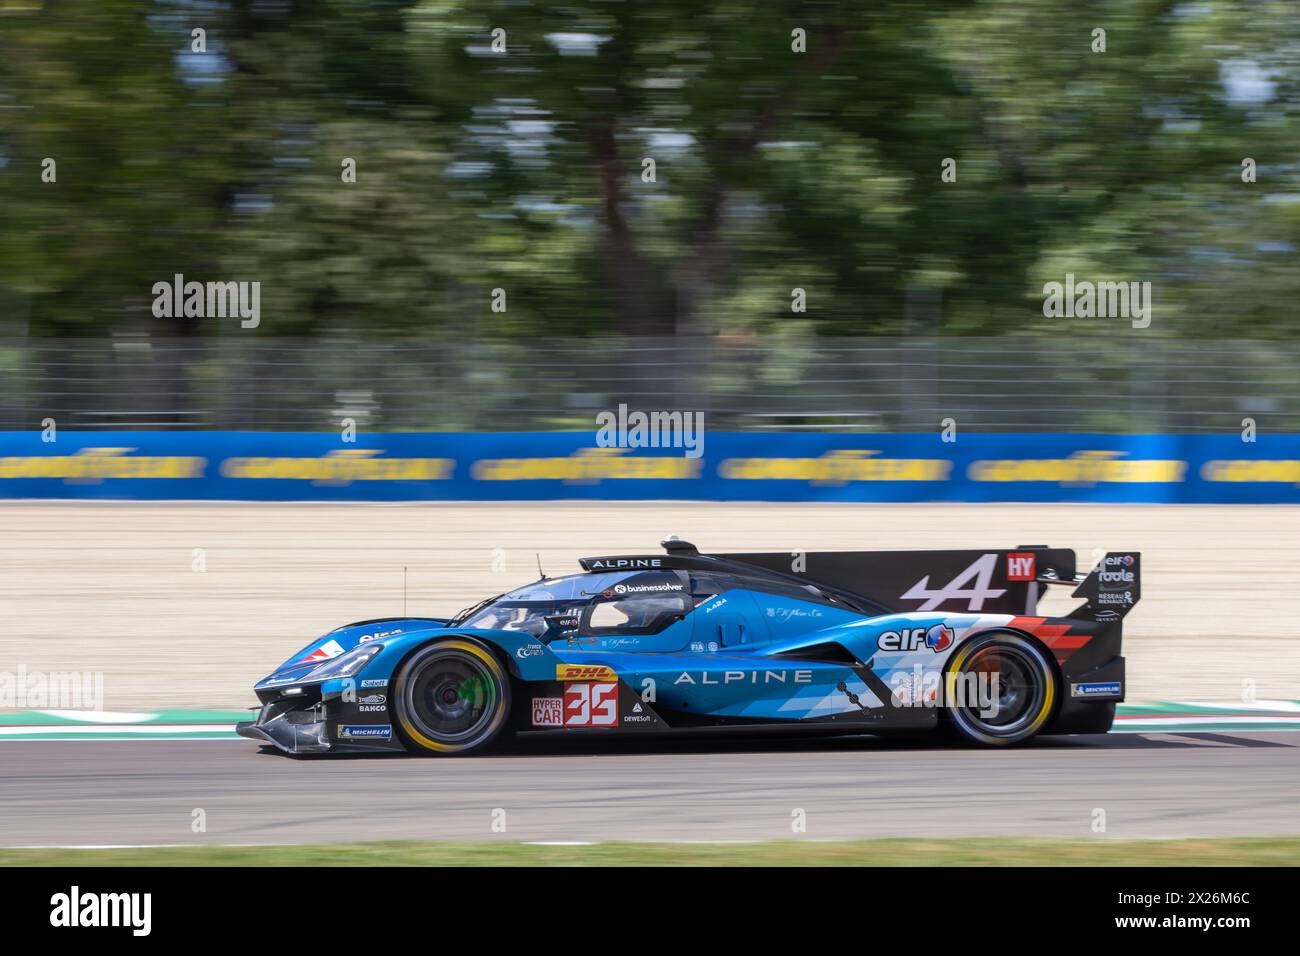 Imola, Italy. 20th Apr, 2024. ALPINE ENDURANCE TEAM (FRA), Alpine A424 - Paul-Loup Chatin (FRA), Ferdinand Habsburg-Lothringen (AUT), Charles Milesi (FRA) during the 6 Hours of Imola, 2nd round of the 2024 FIA World Endurance Championship, at International Circuit Enzo and Dino Ferrari, Imola, Italy on April 20, 2024 during WEC - 6 Hours of Imola Qualifiyng Race, Endurance race in Imola, Italy, April 20 2024 Credit: Independent Photo Agency/Alamy Live News Stock Photo